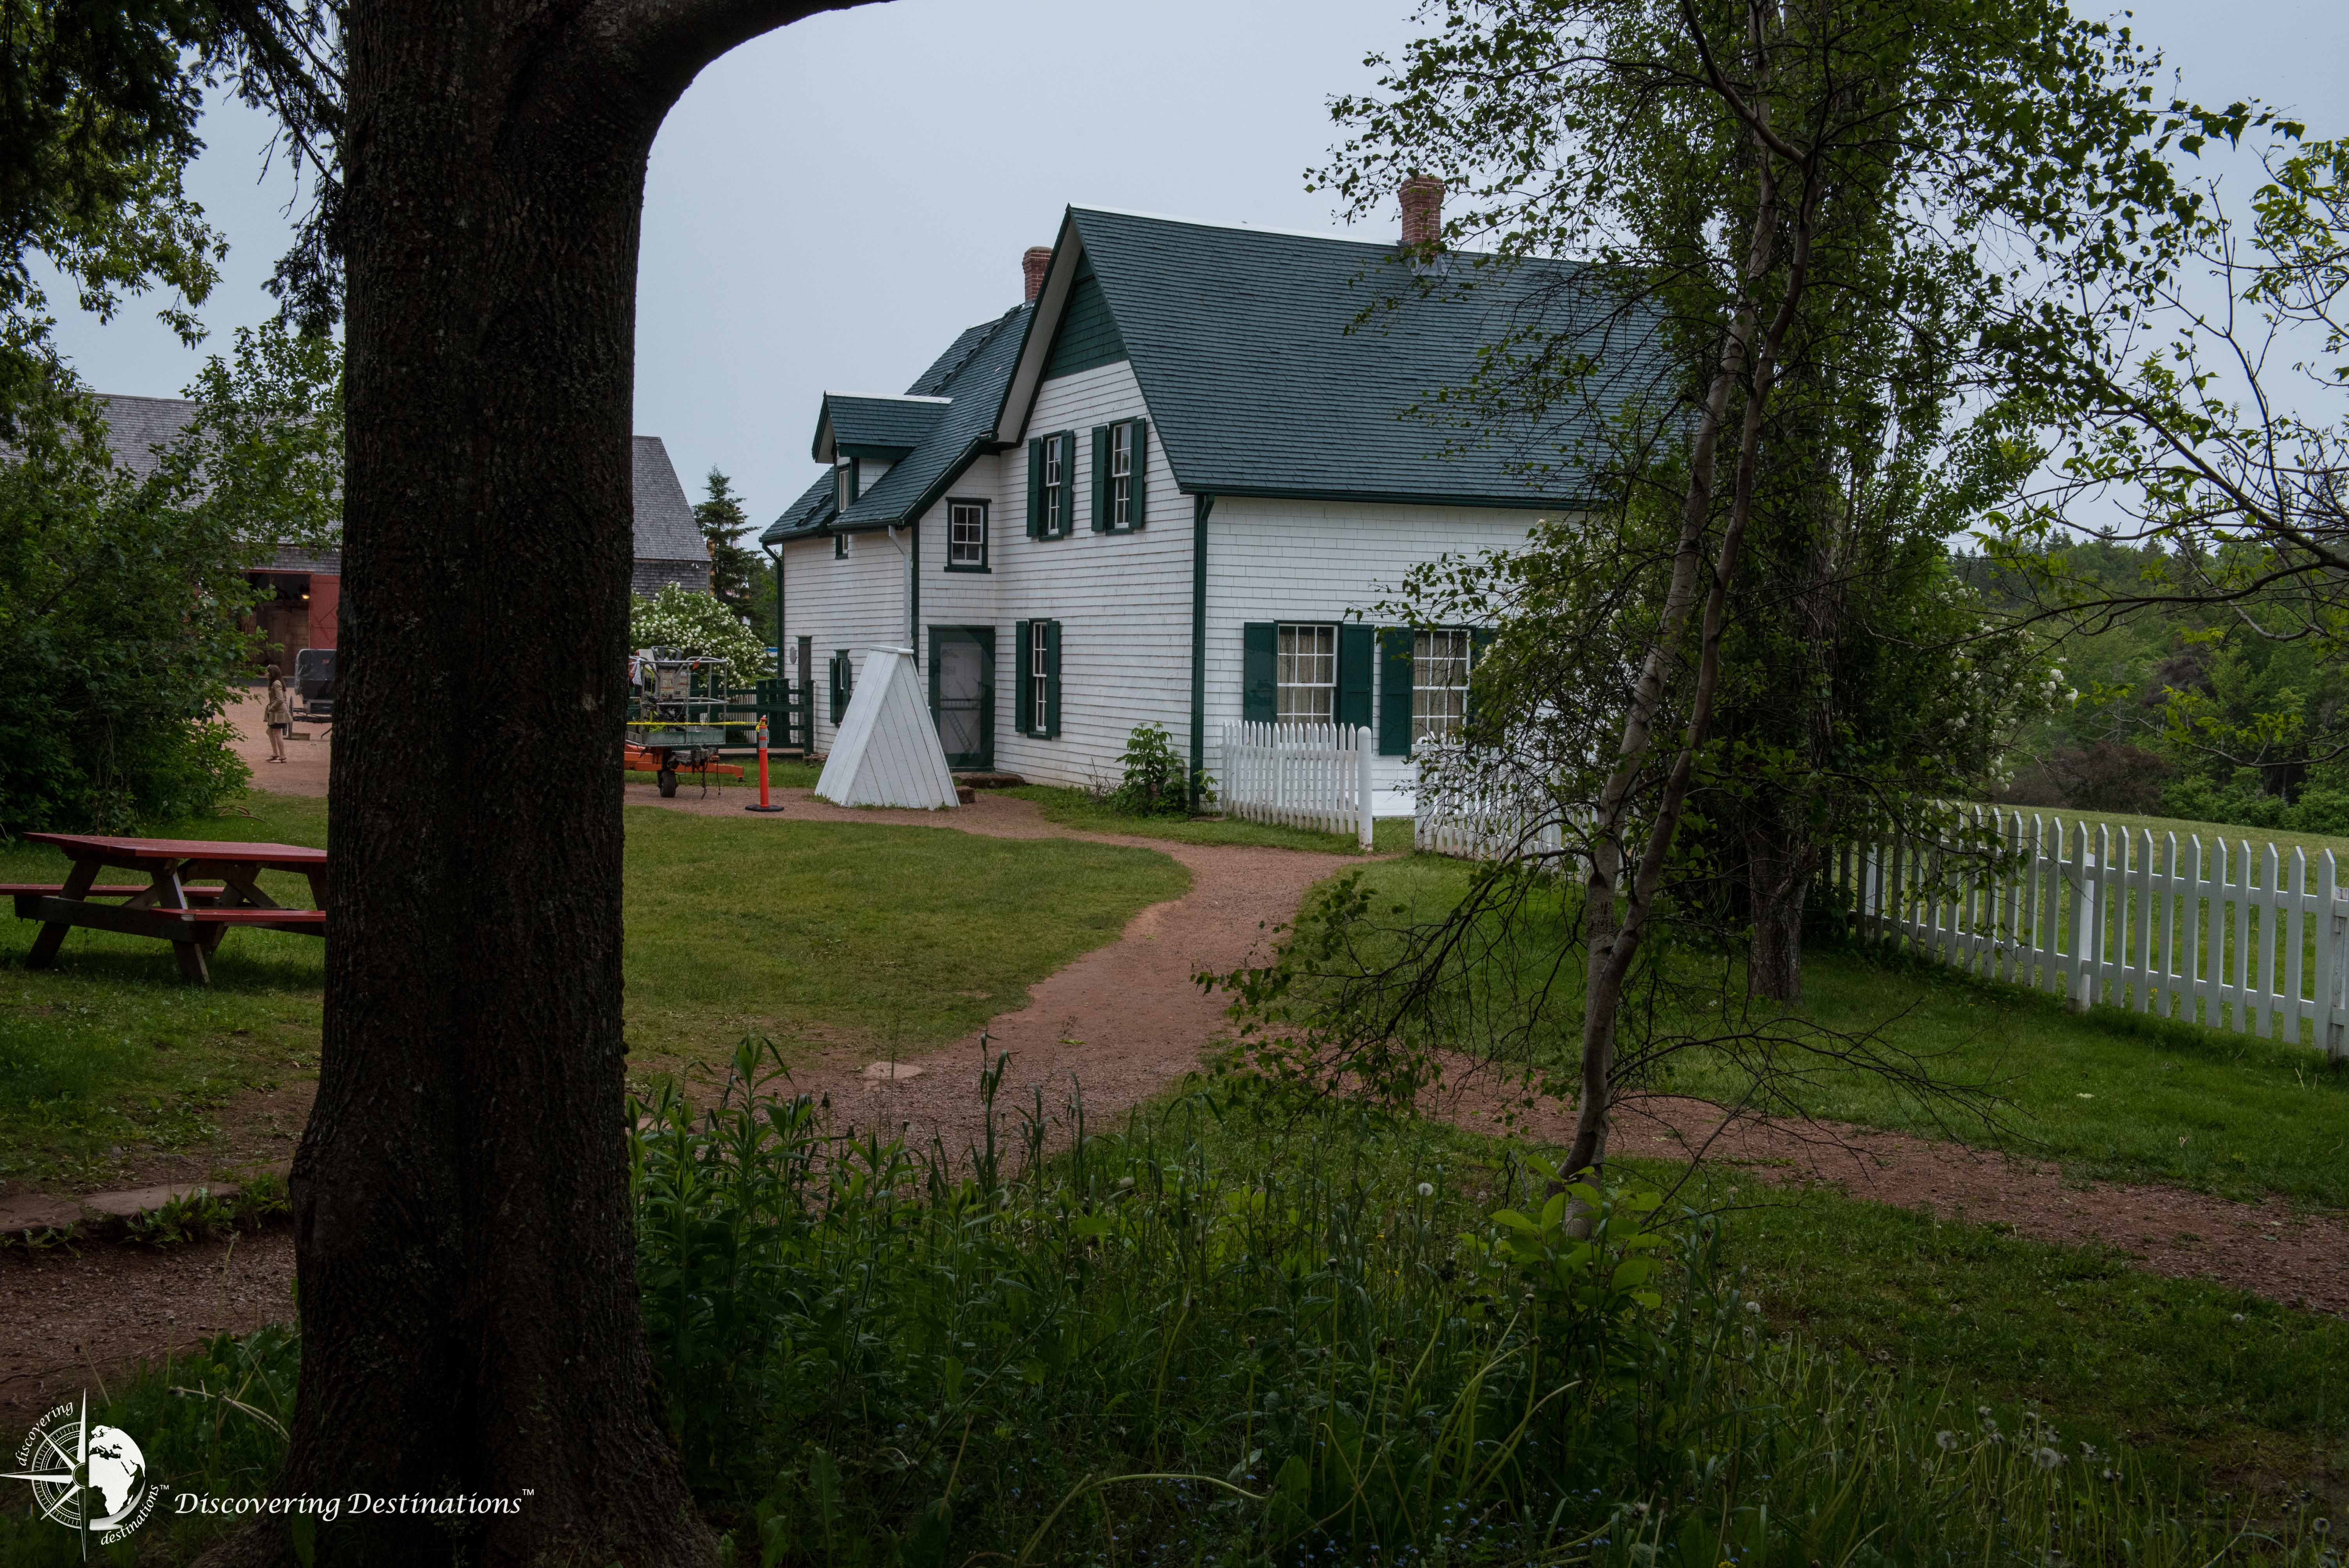 Discovering Anne of Green Gables